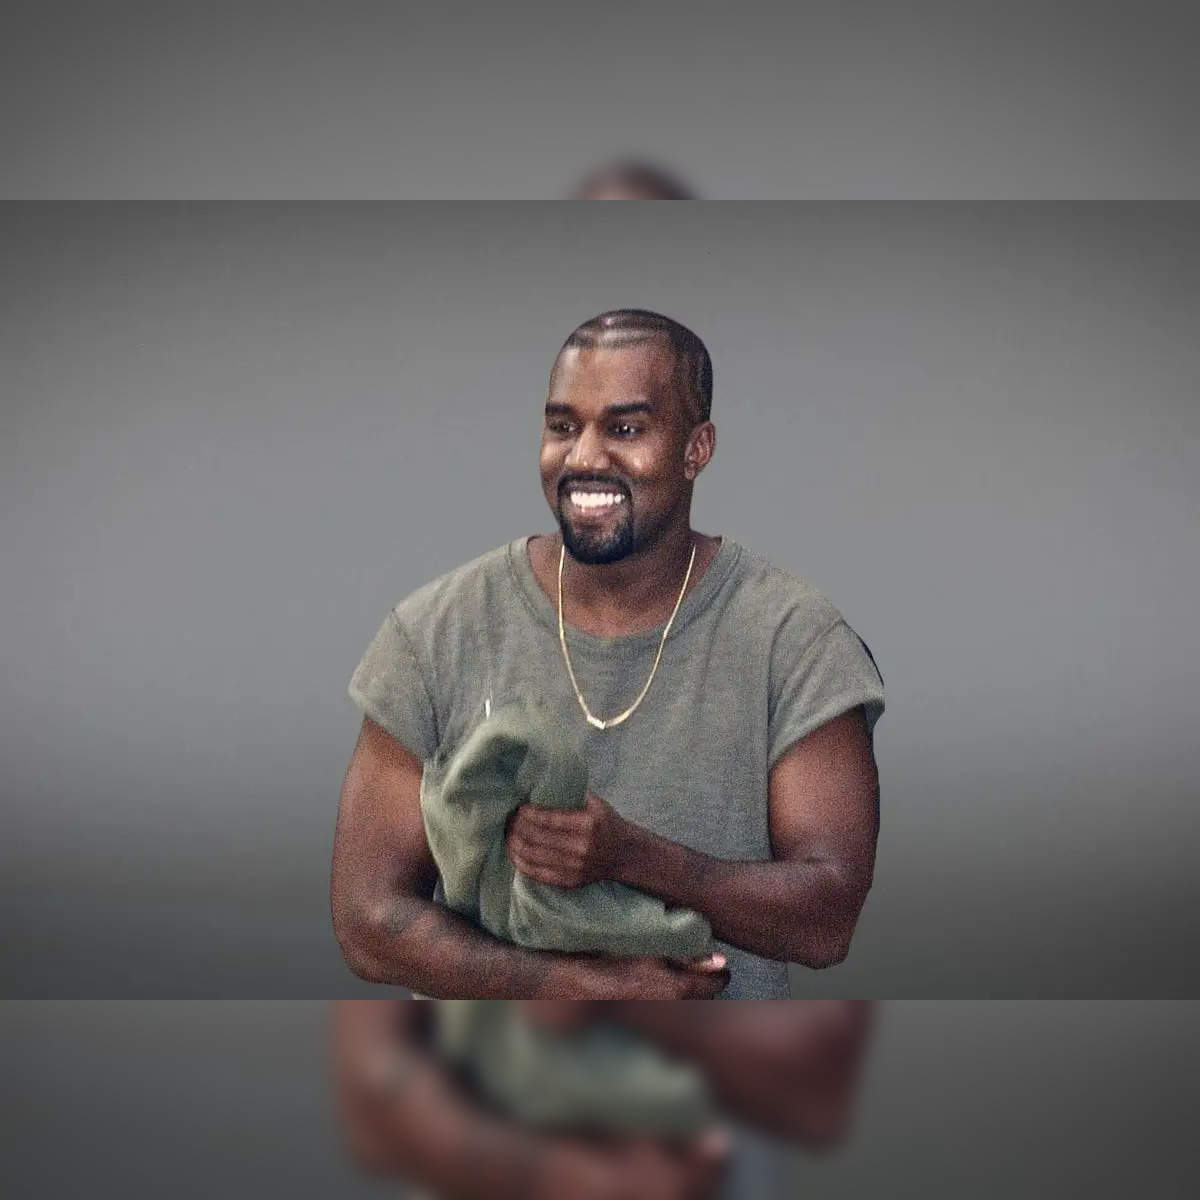 Kanye West to debut new album featuring top artists, antisemitic lyrics